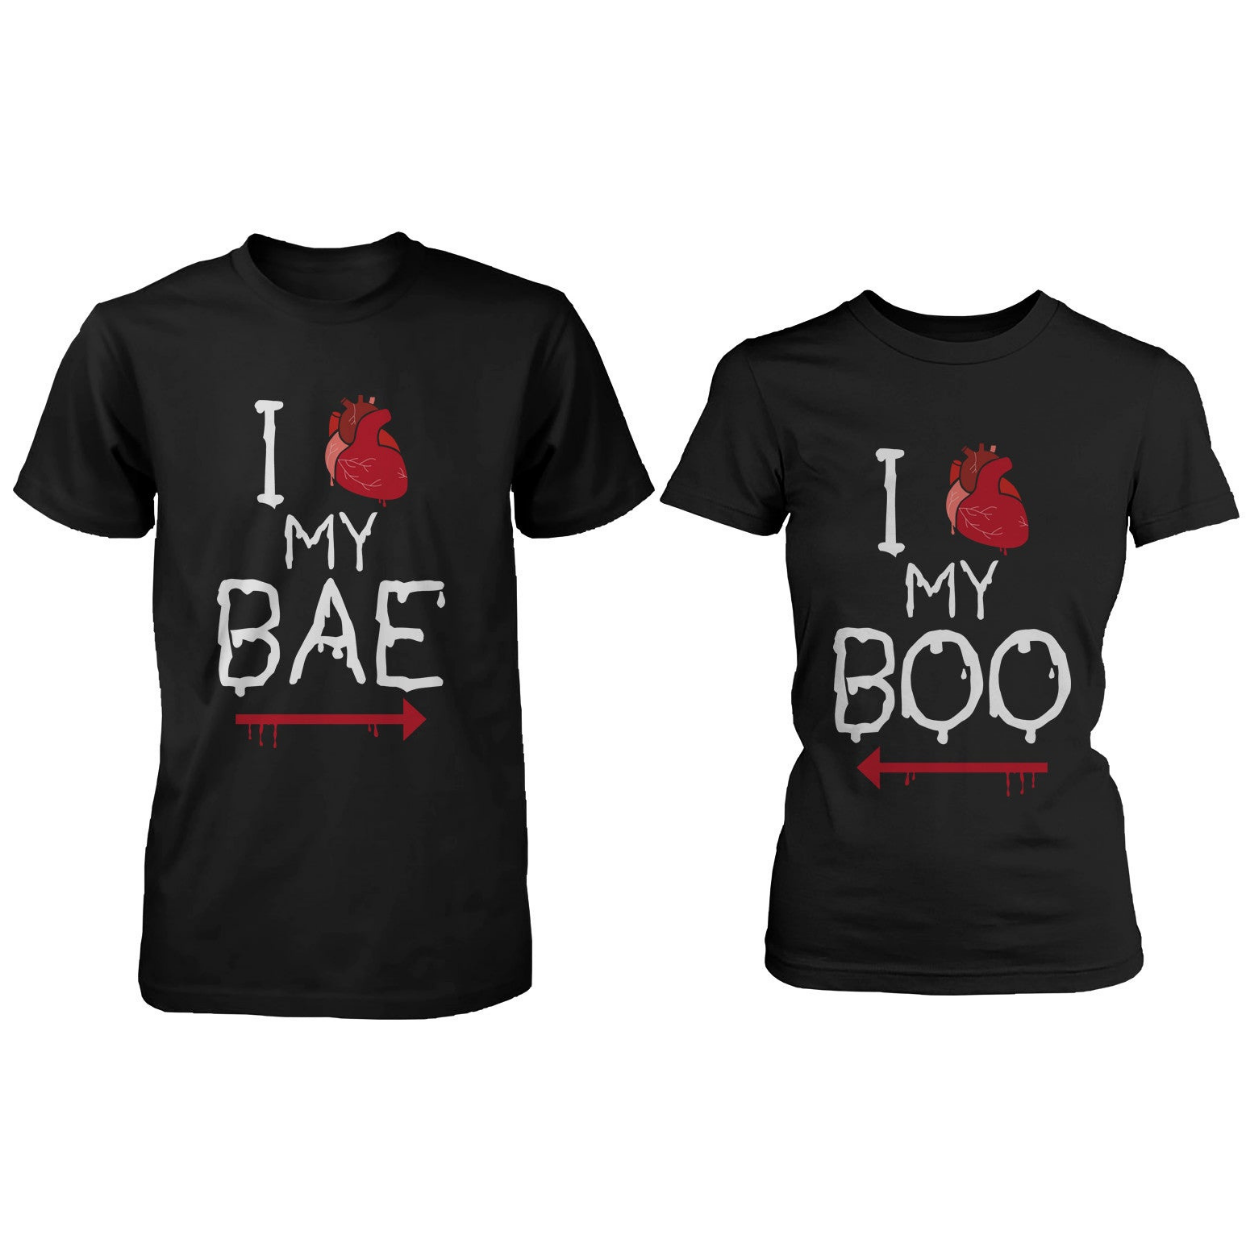 I Heart My Bae And Boo Pointing Each Other Horror Matching Couple T-Shirts For Halloween - 365 In Love